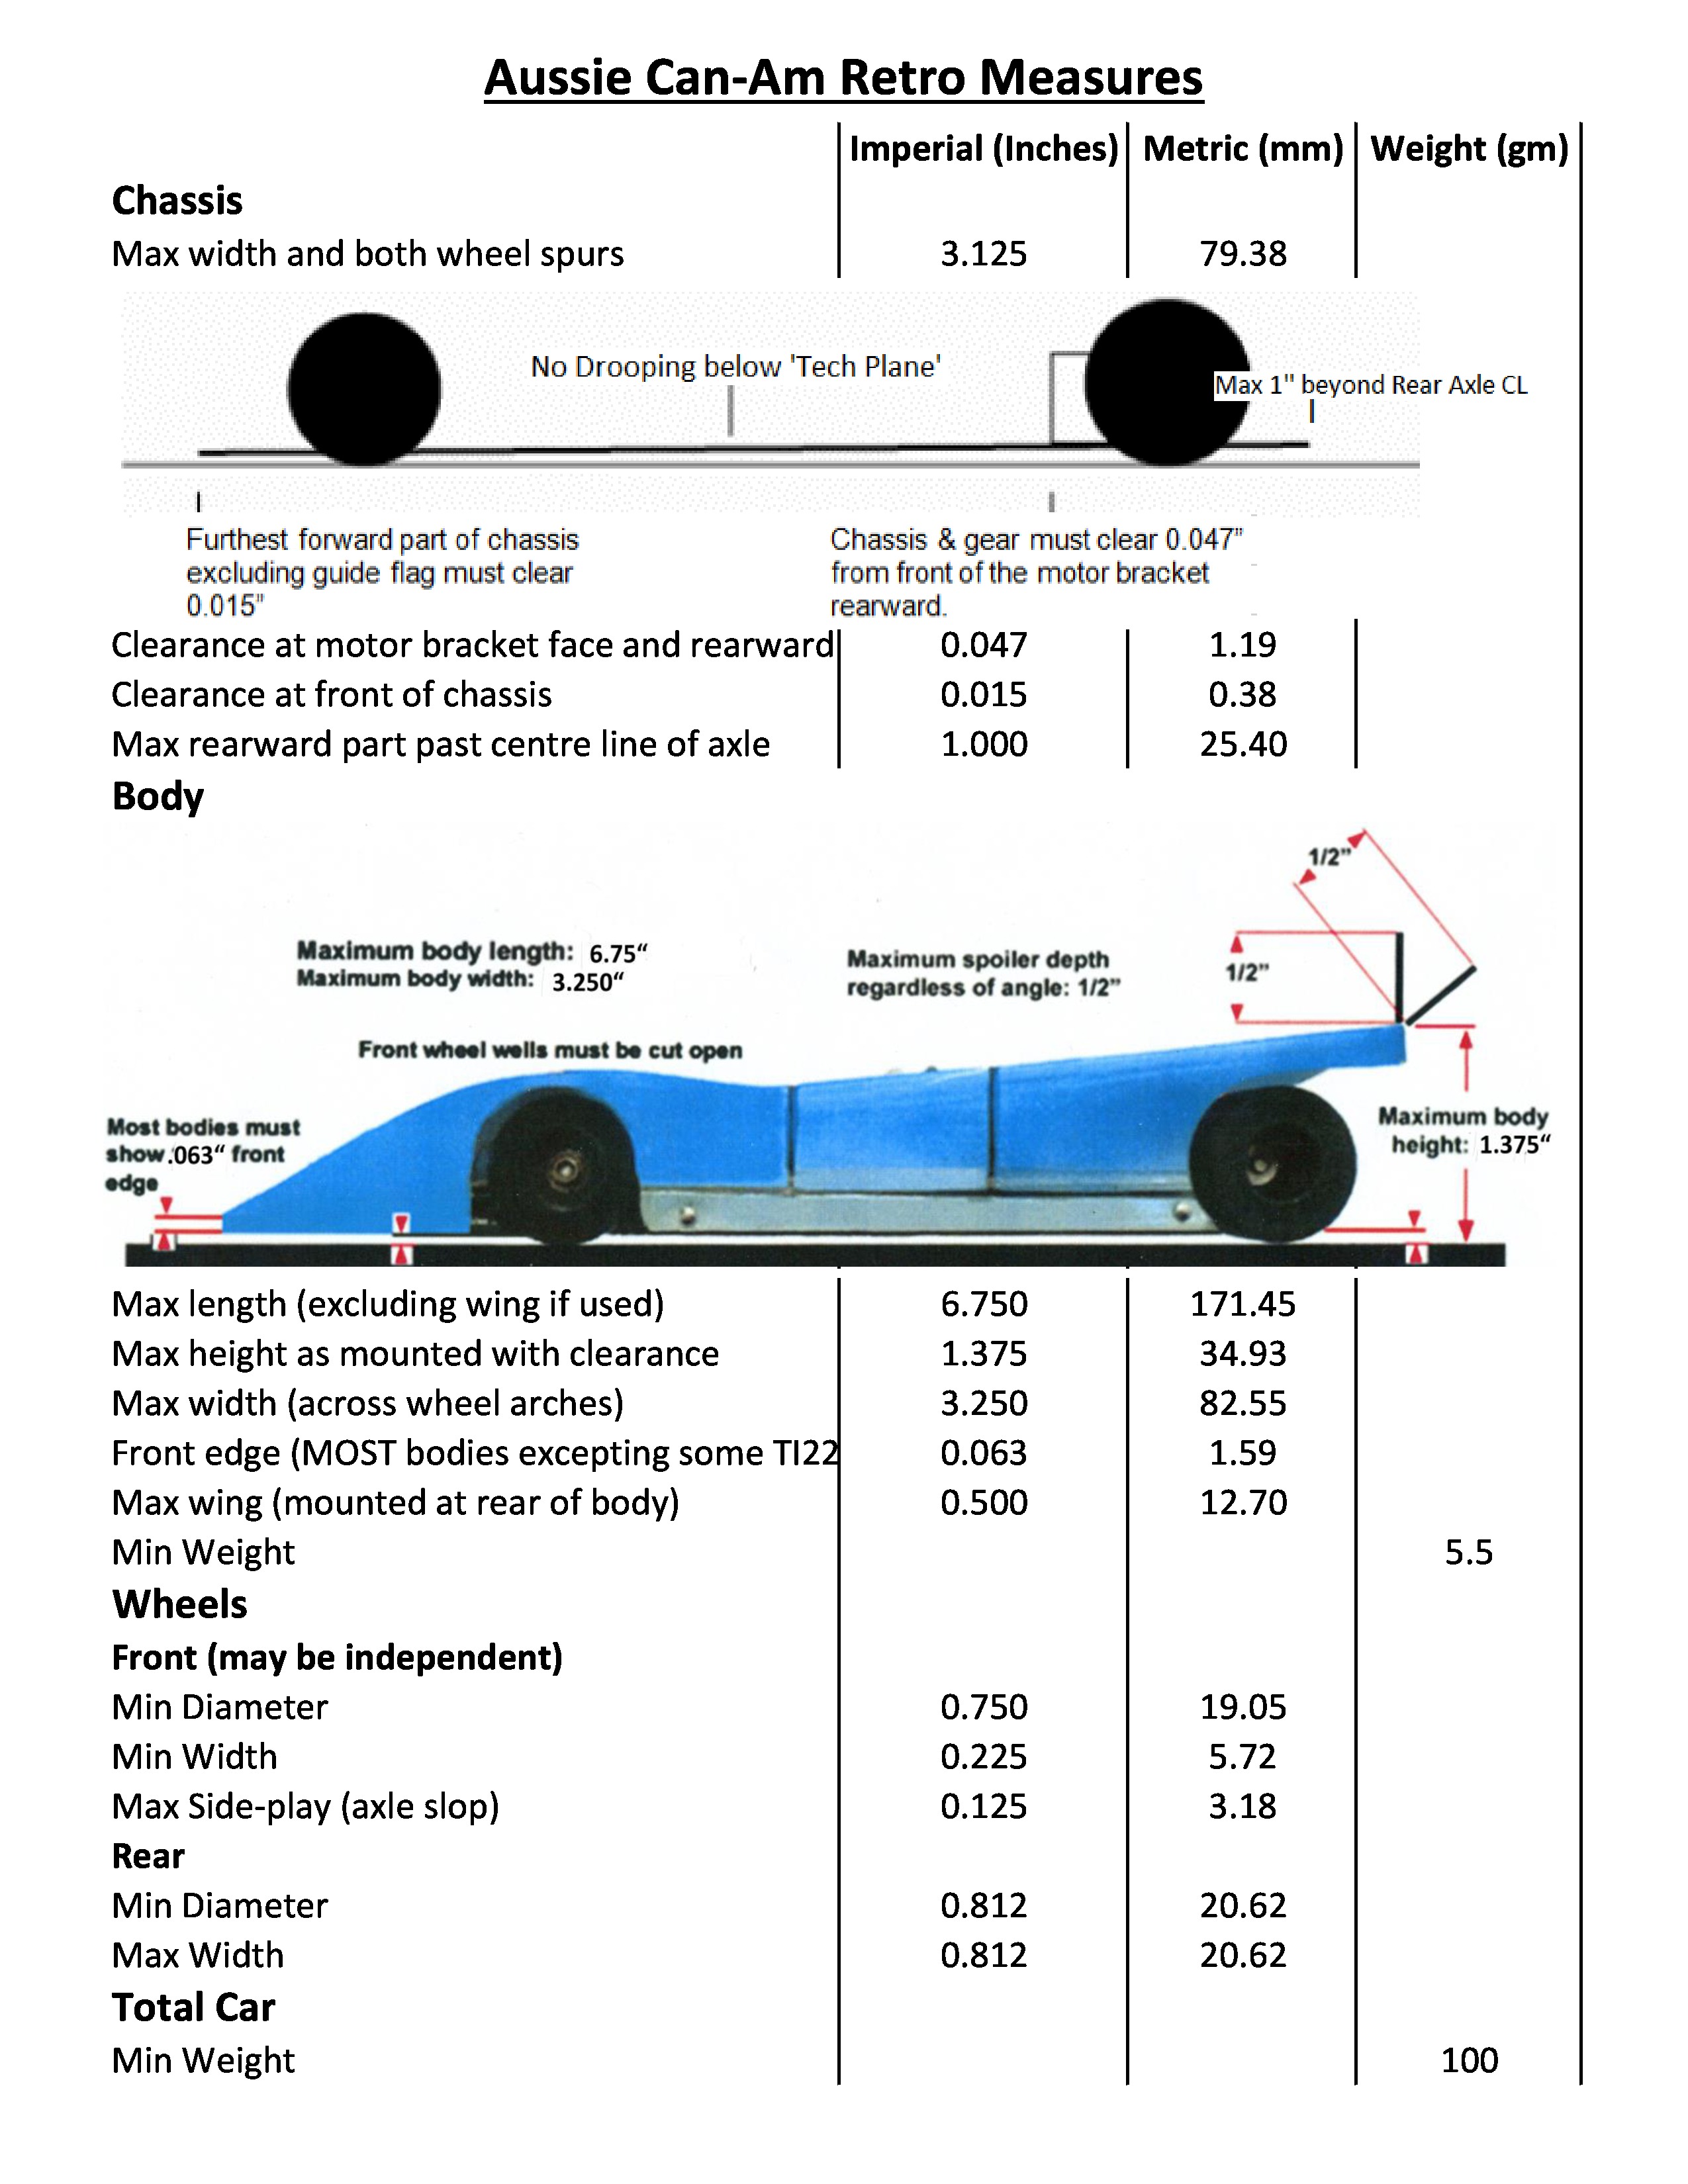 CanAm Measures-page-0.jpg